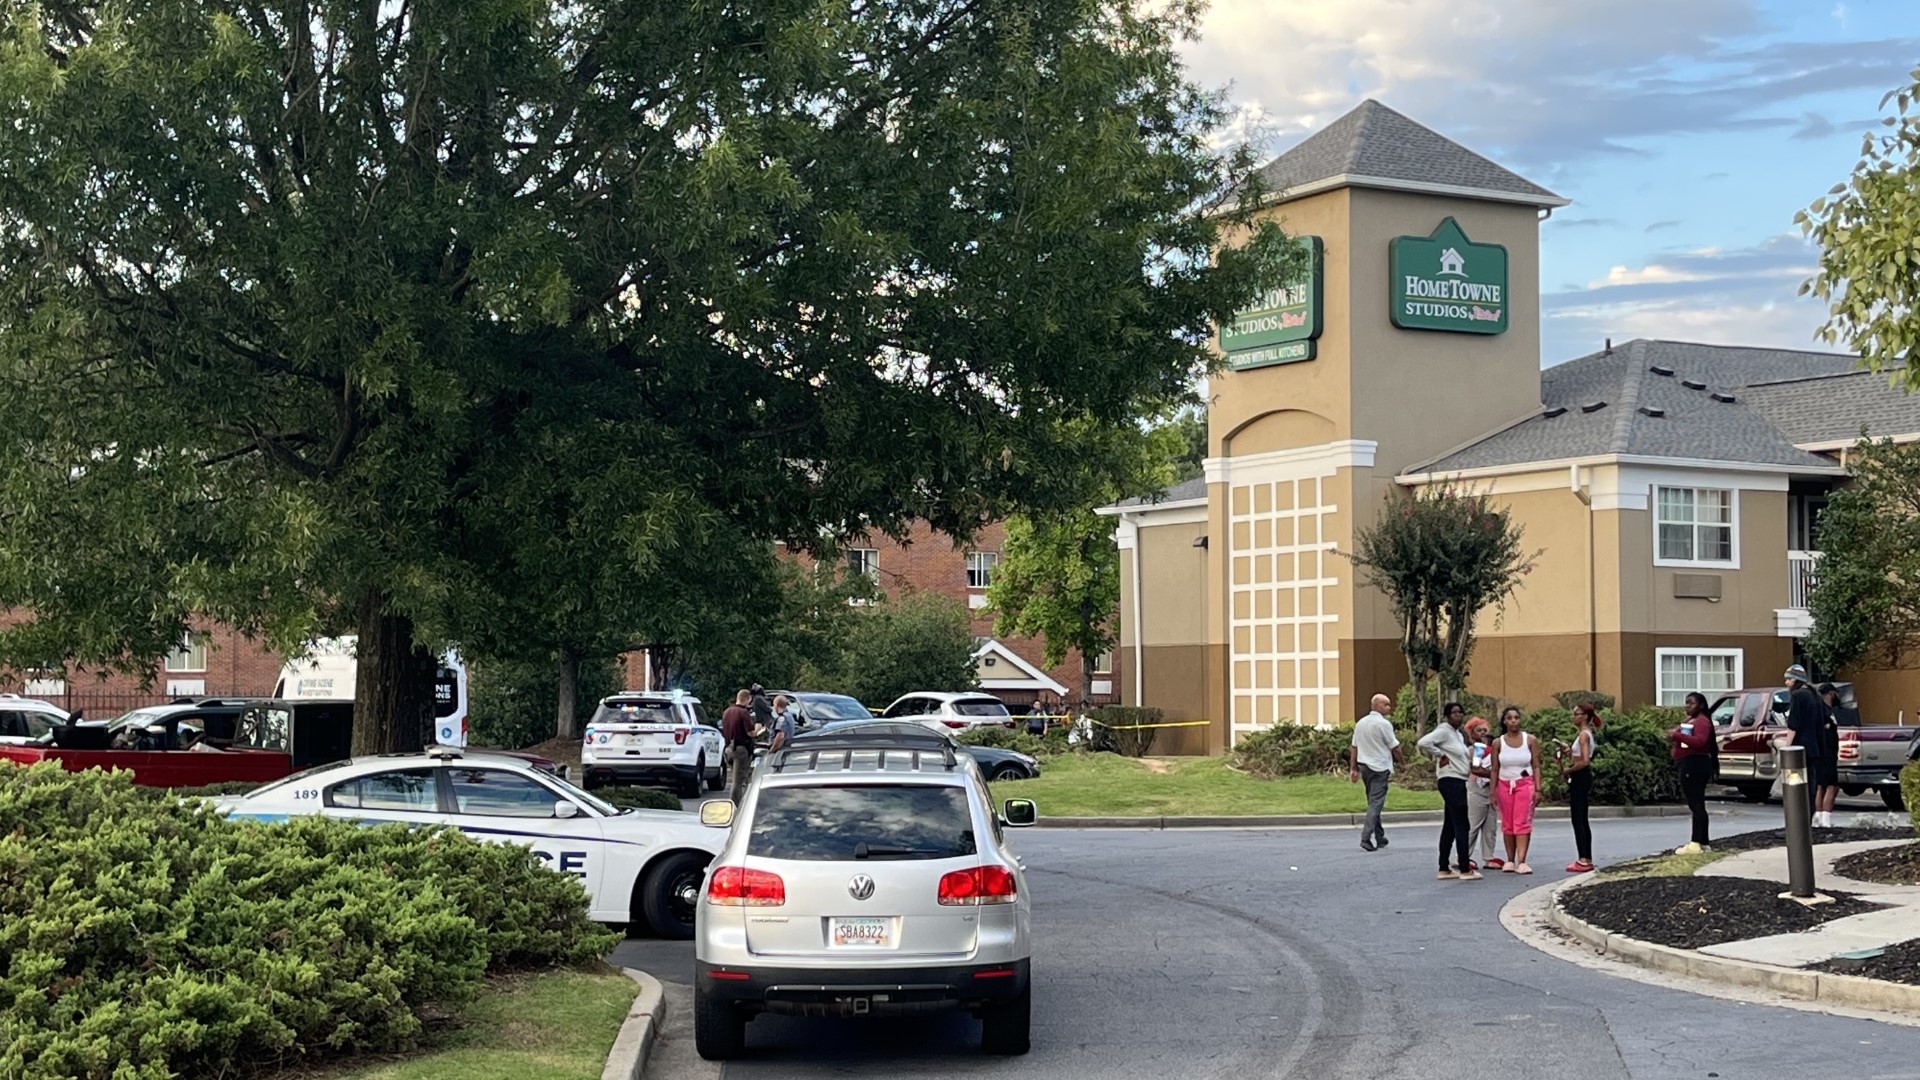 An altercation led to a deadly shooting at a hotel Tuesday evening, according to the Gwinnett County Police Department.